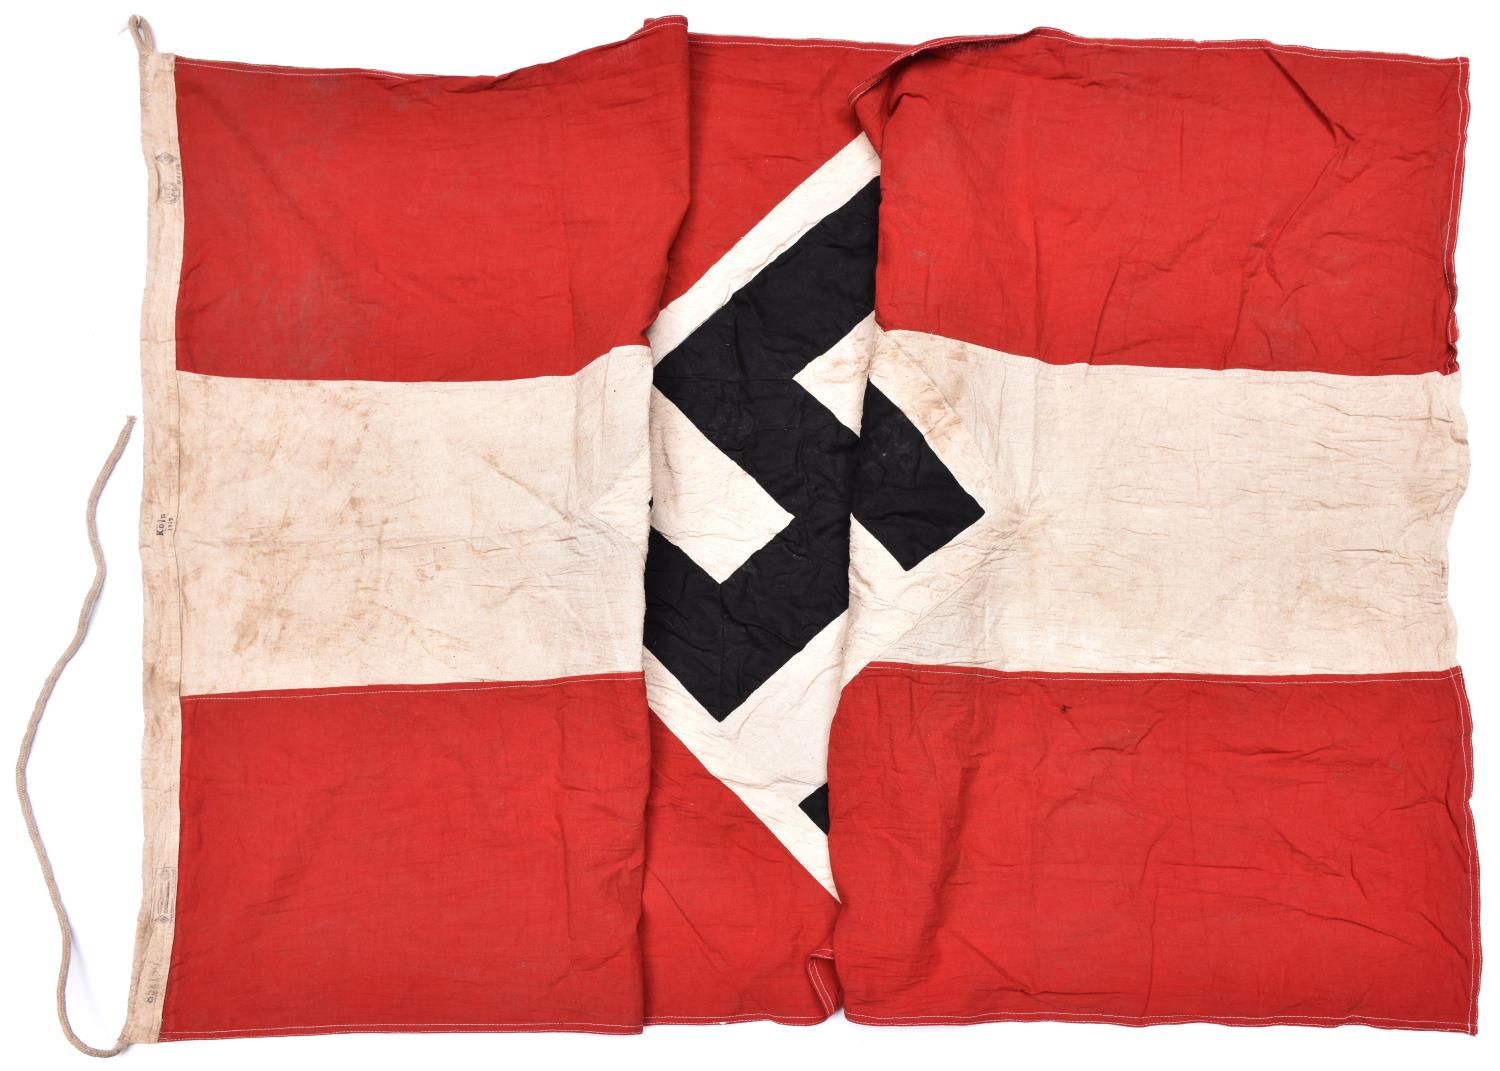 A Third Reich Hitler Youth flag, 85mm x 150mm, swastika on an applied diamond shaped panel,